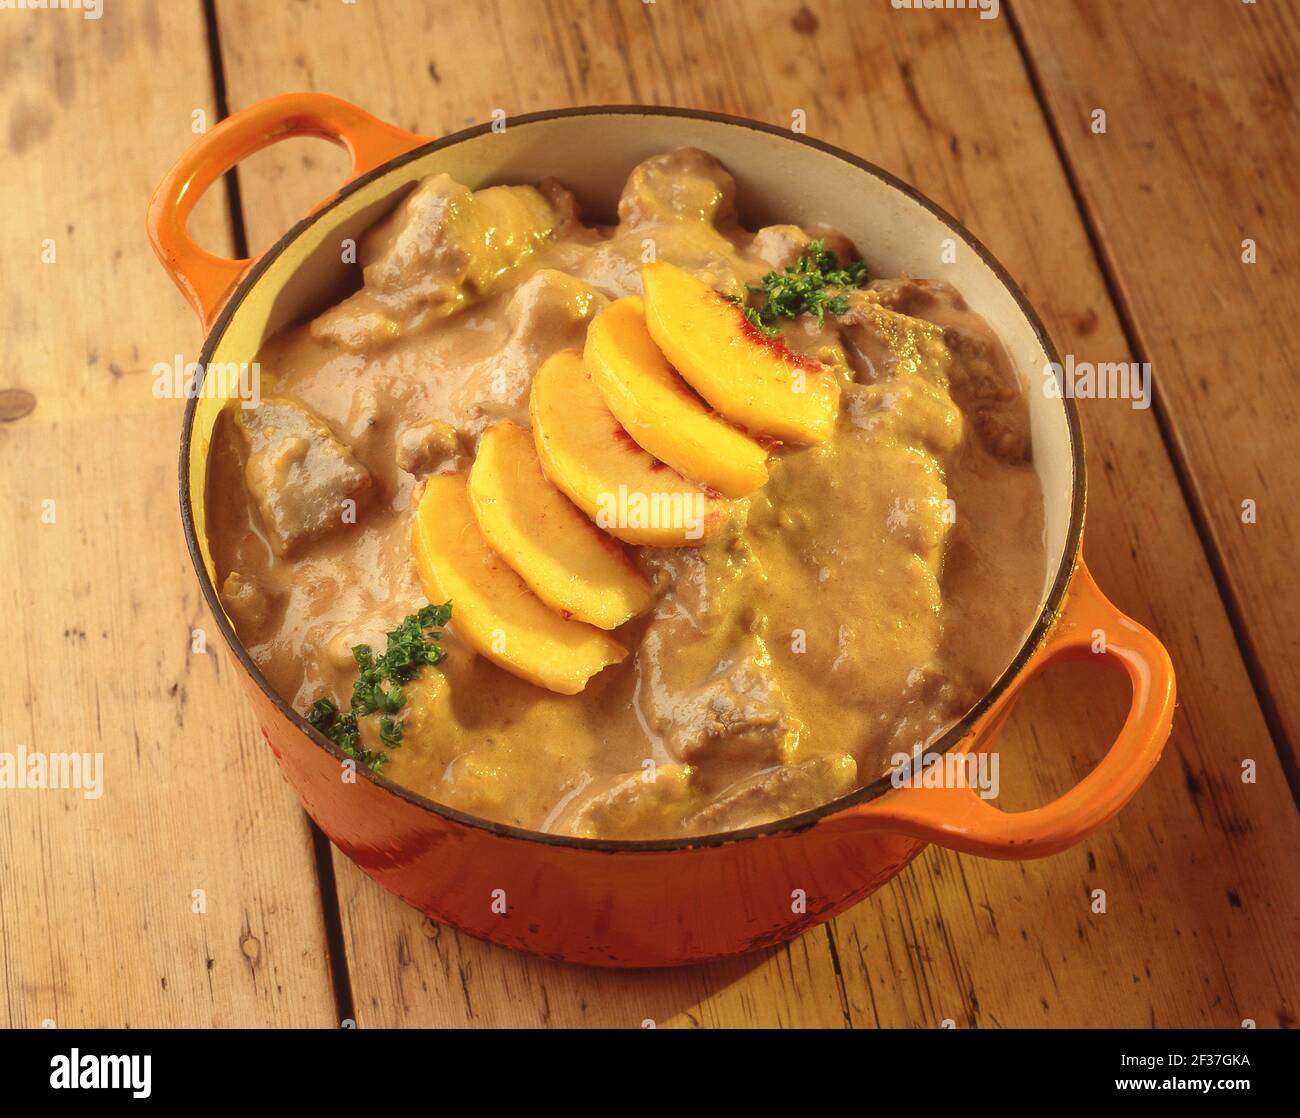 Beef stew with peach slices on wooden table, Winkfield, Berkshire, England, United Kingdom Stock Photo